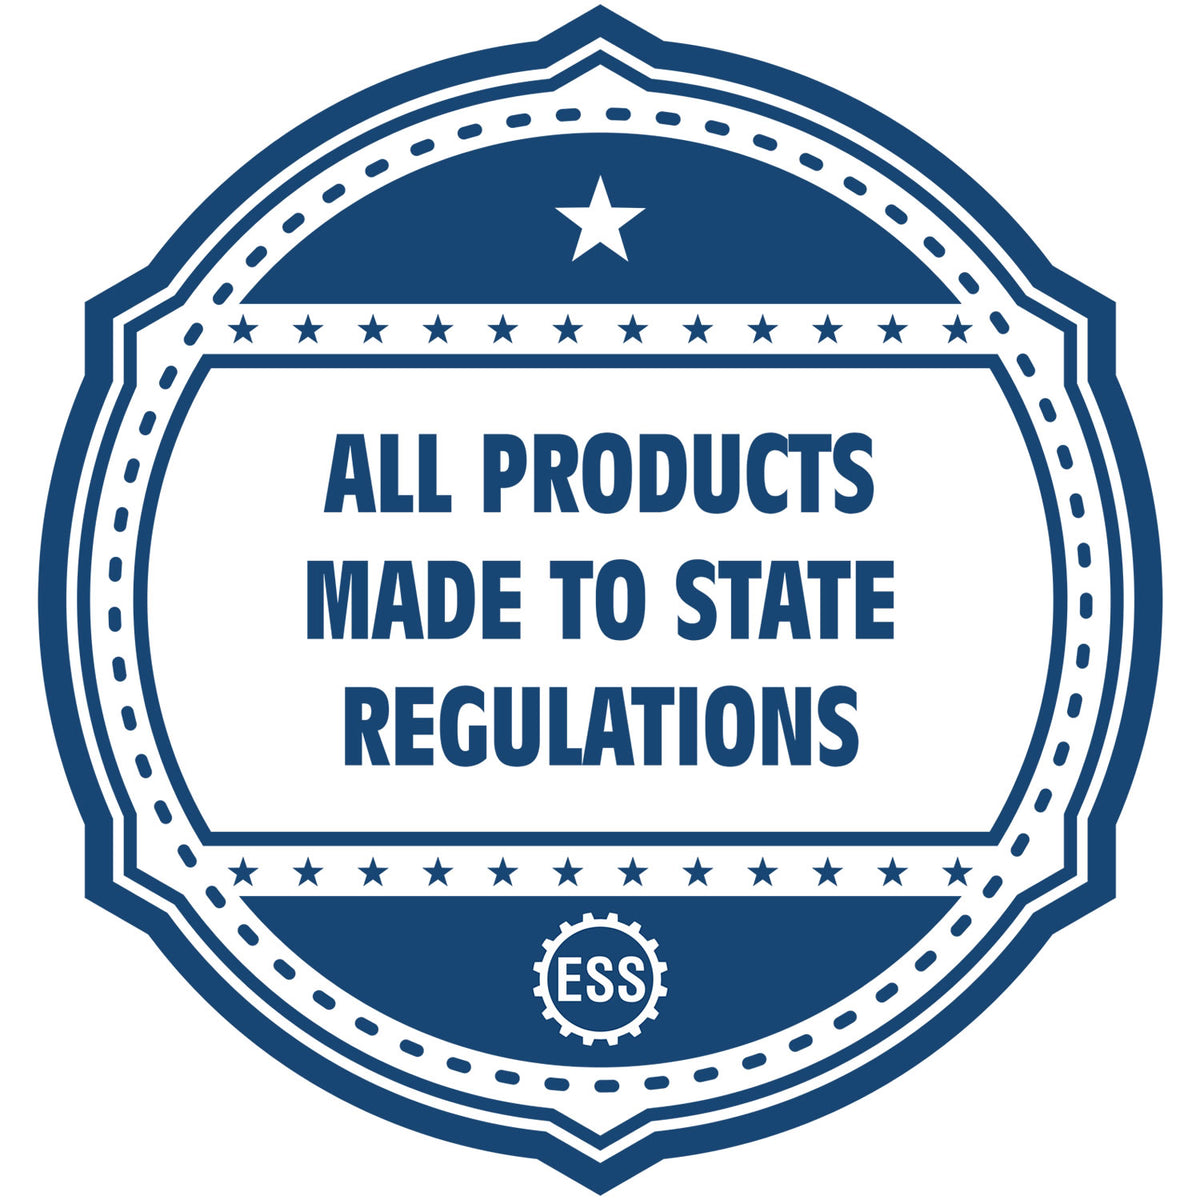 An icon or badge element for the State of Indiana Soft Land Surveyor Embossing Seal showing that this product is made in compliance with state regulations.